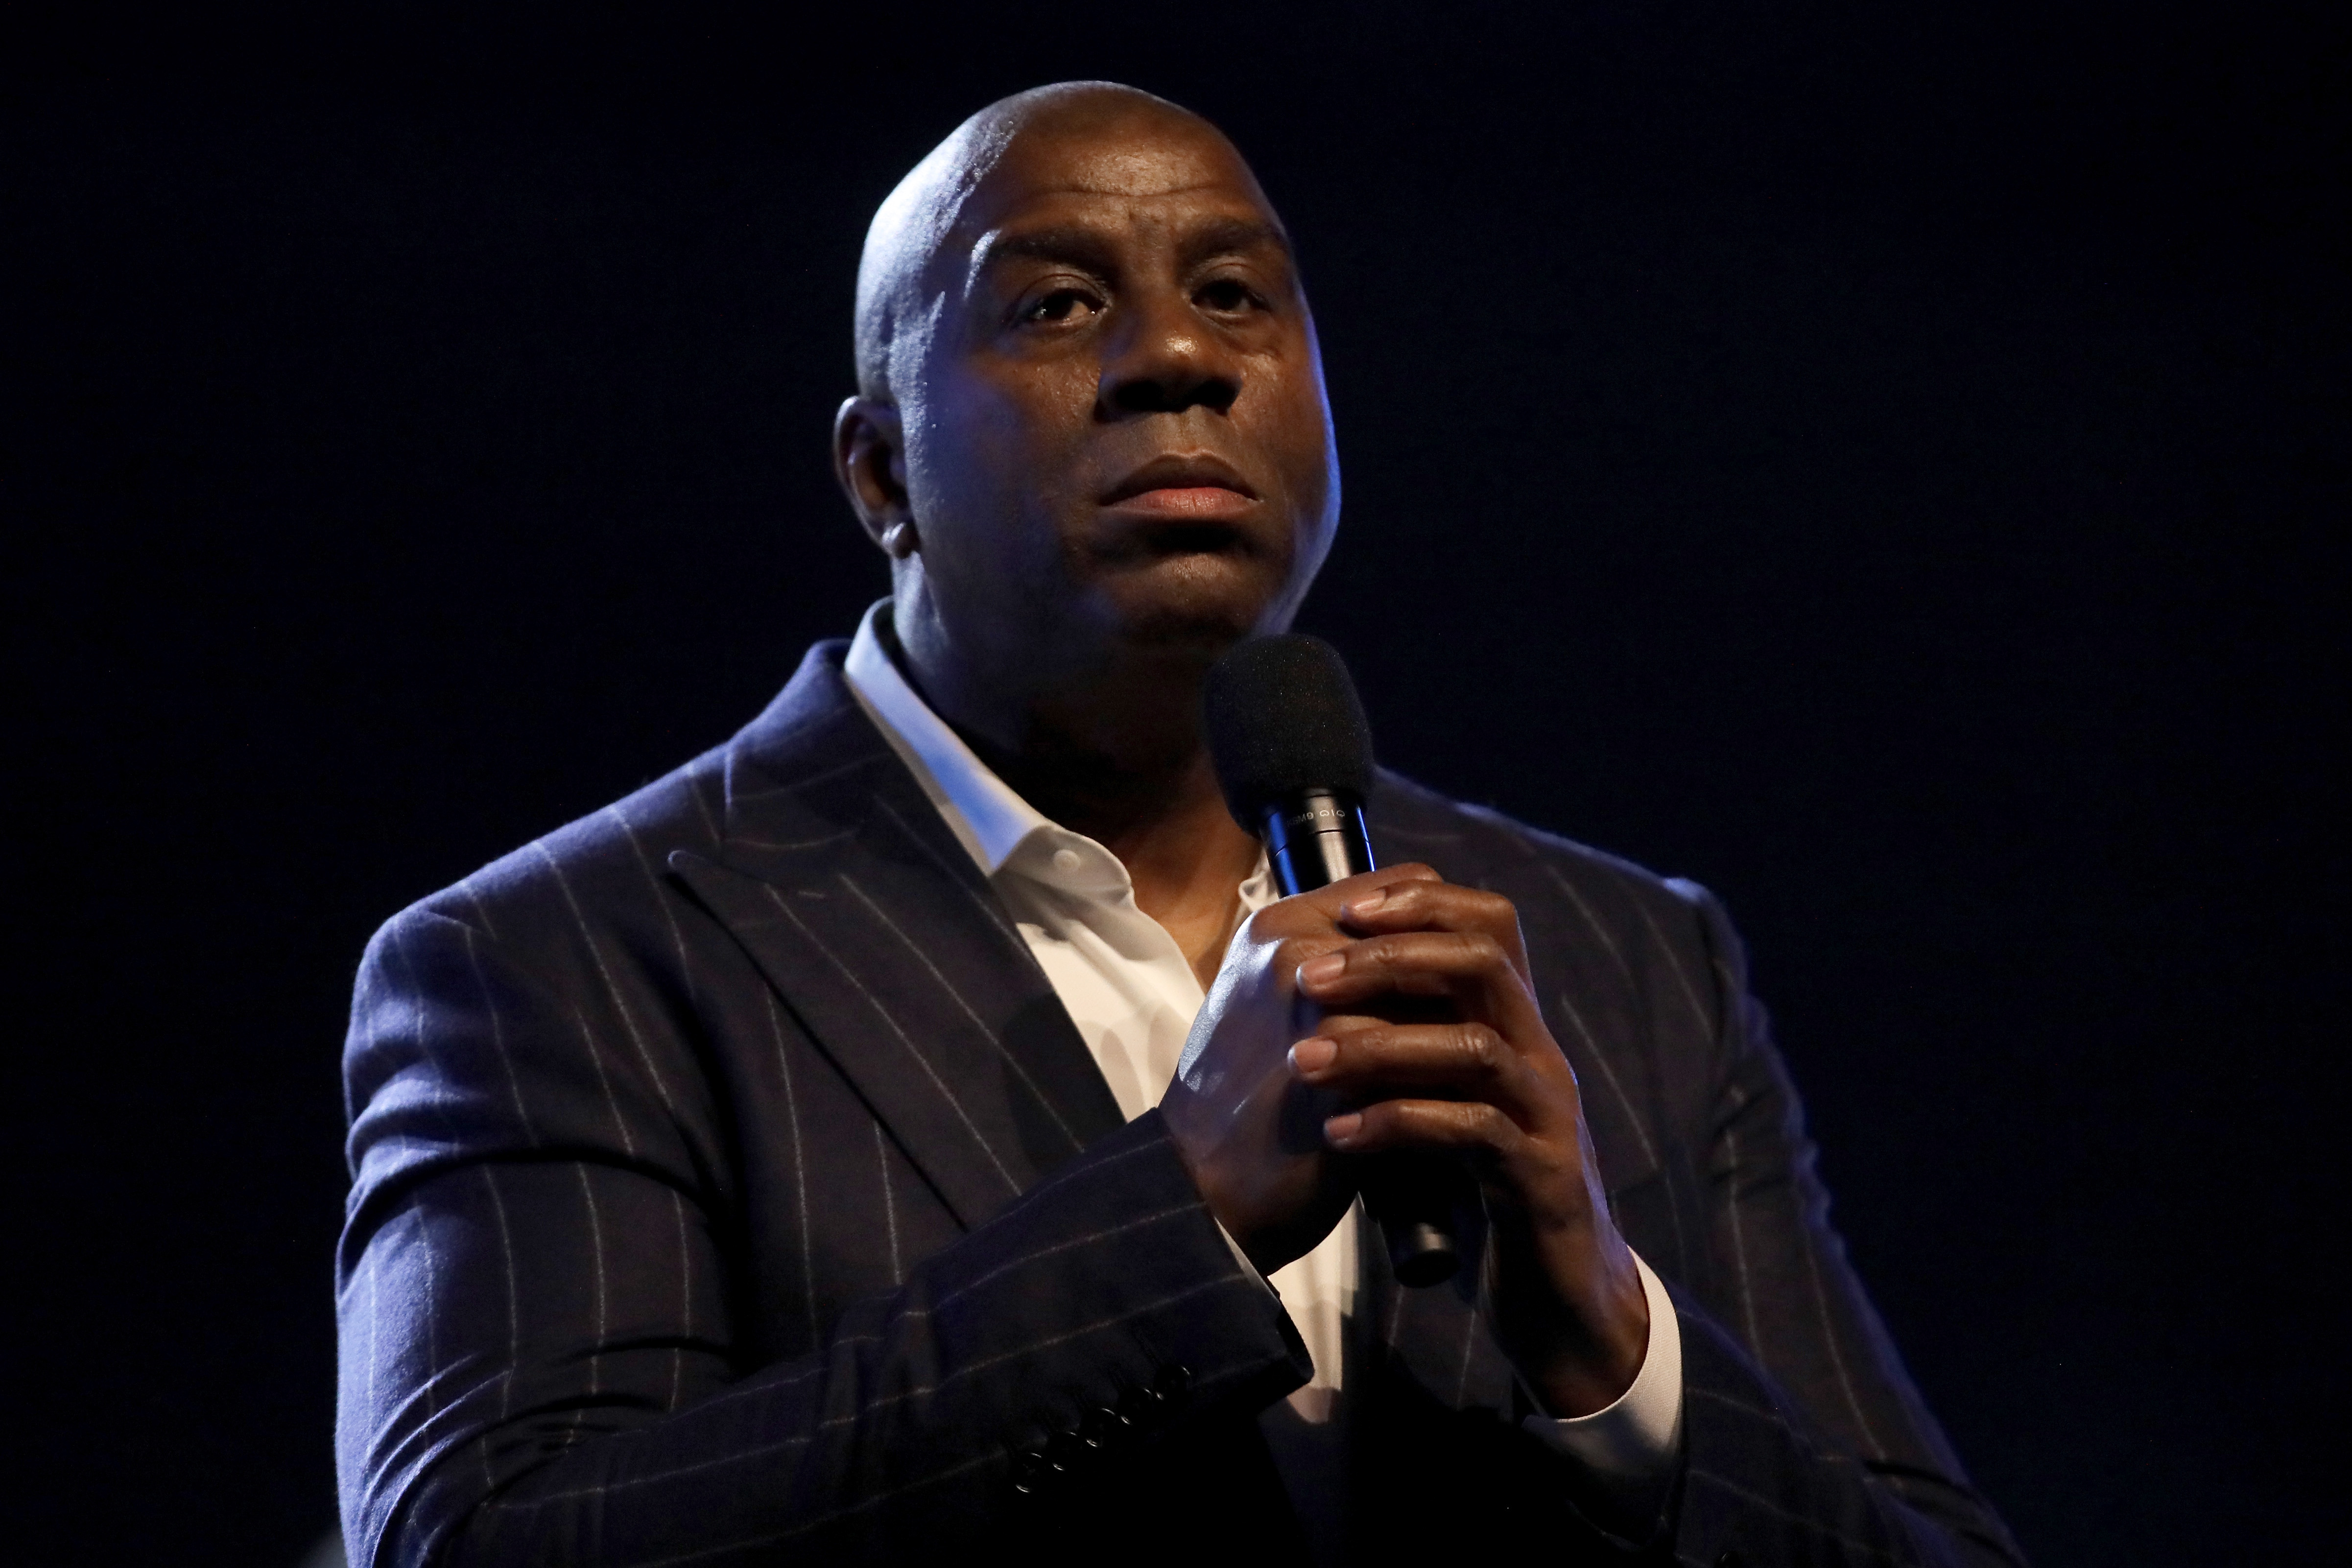 Magic Johnson speaks to the crowd before the 69th NBA All-Star Game at the United Center on February 16, 2020 in Chicago.